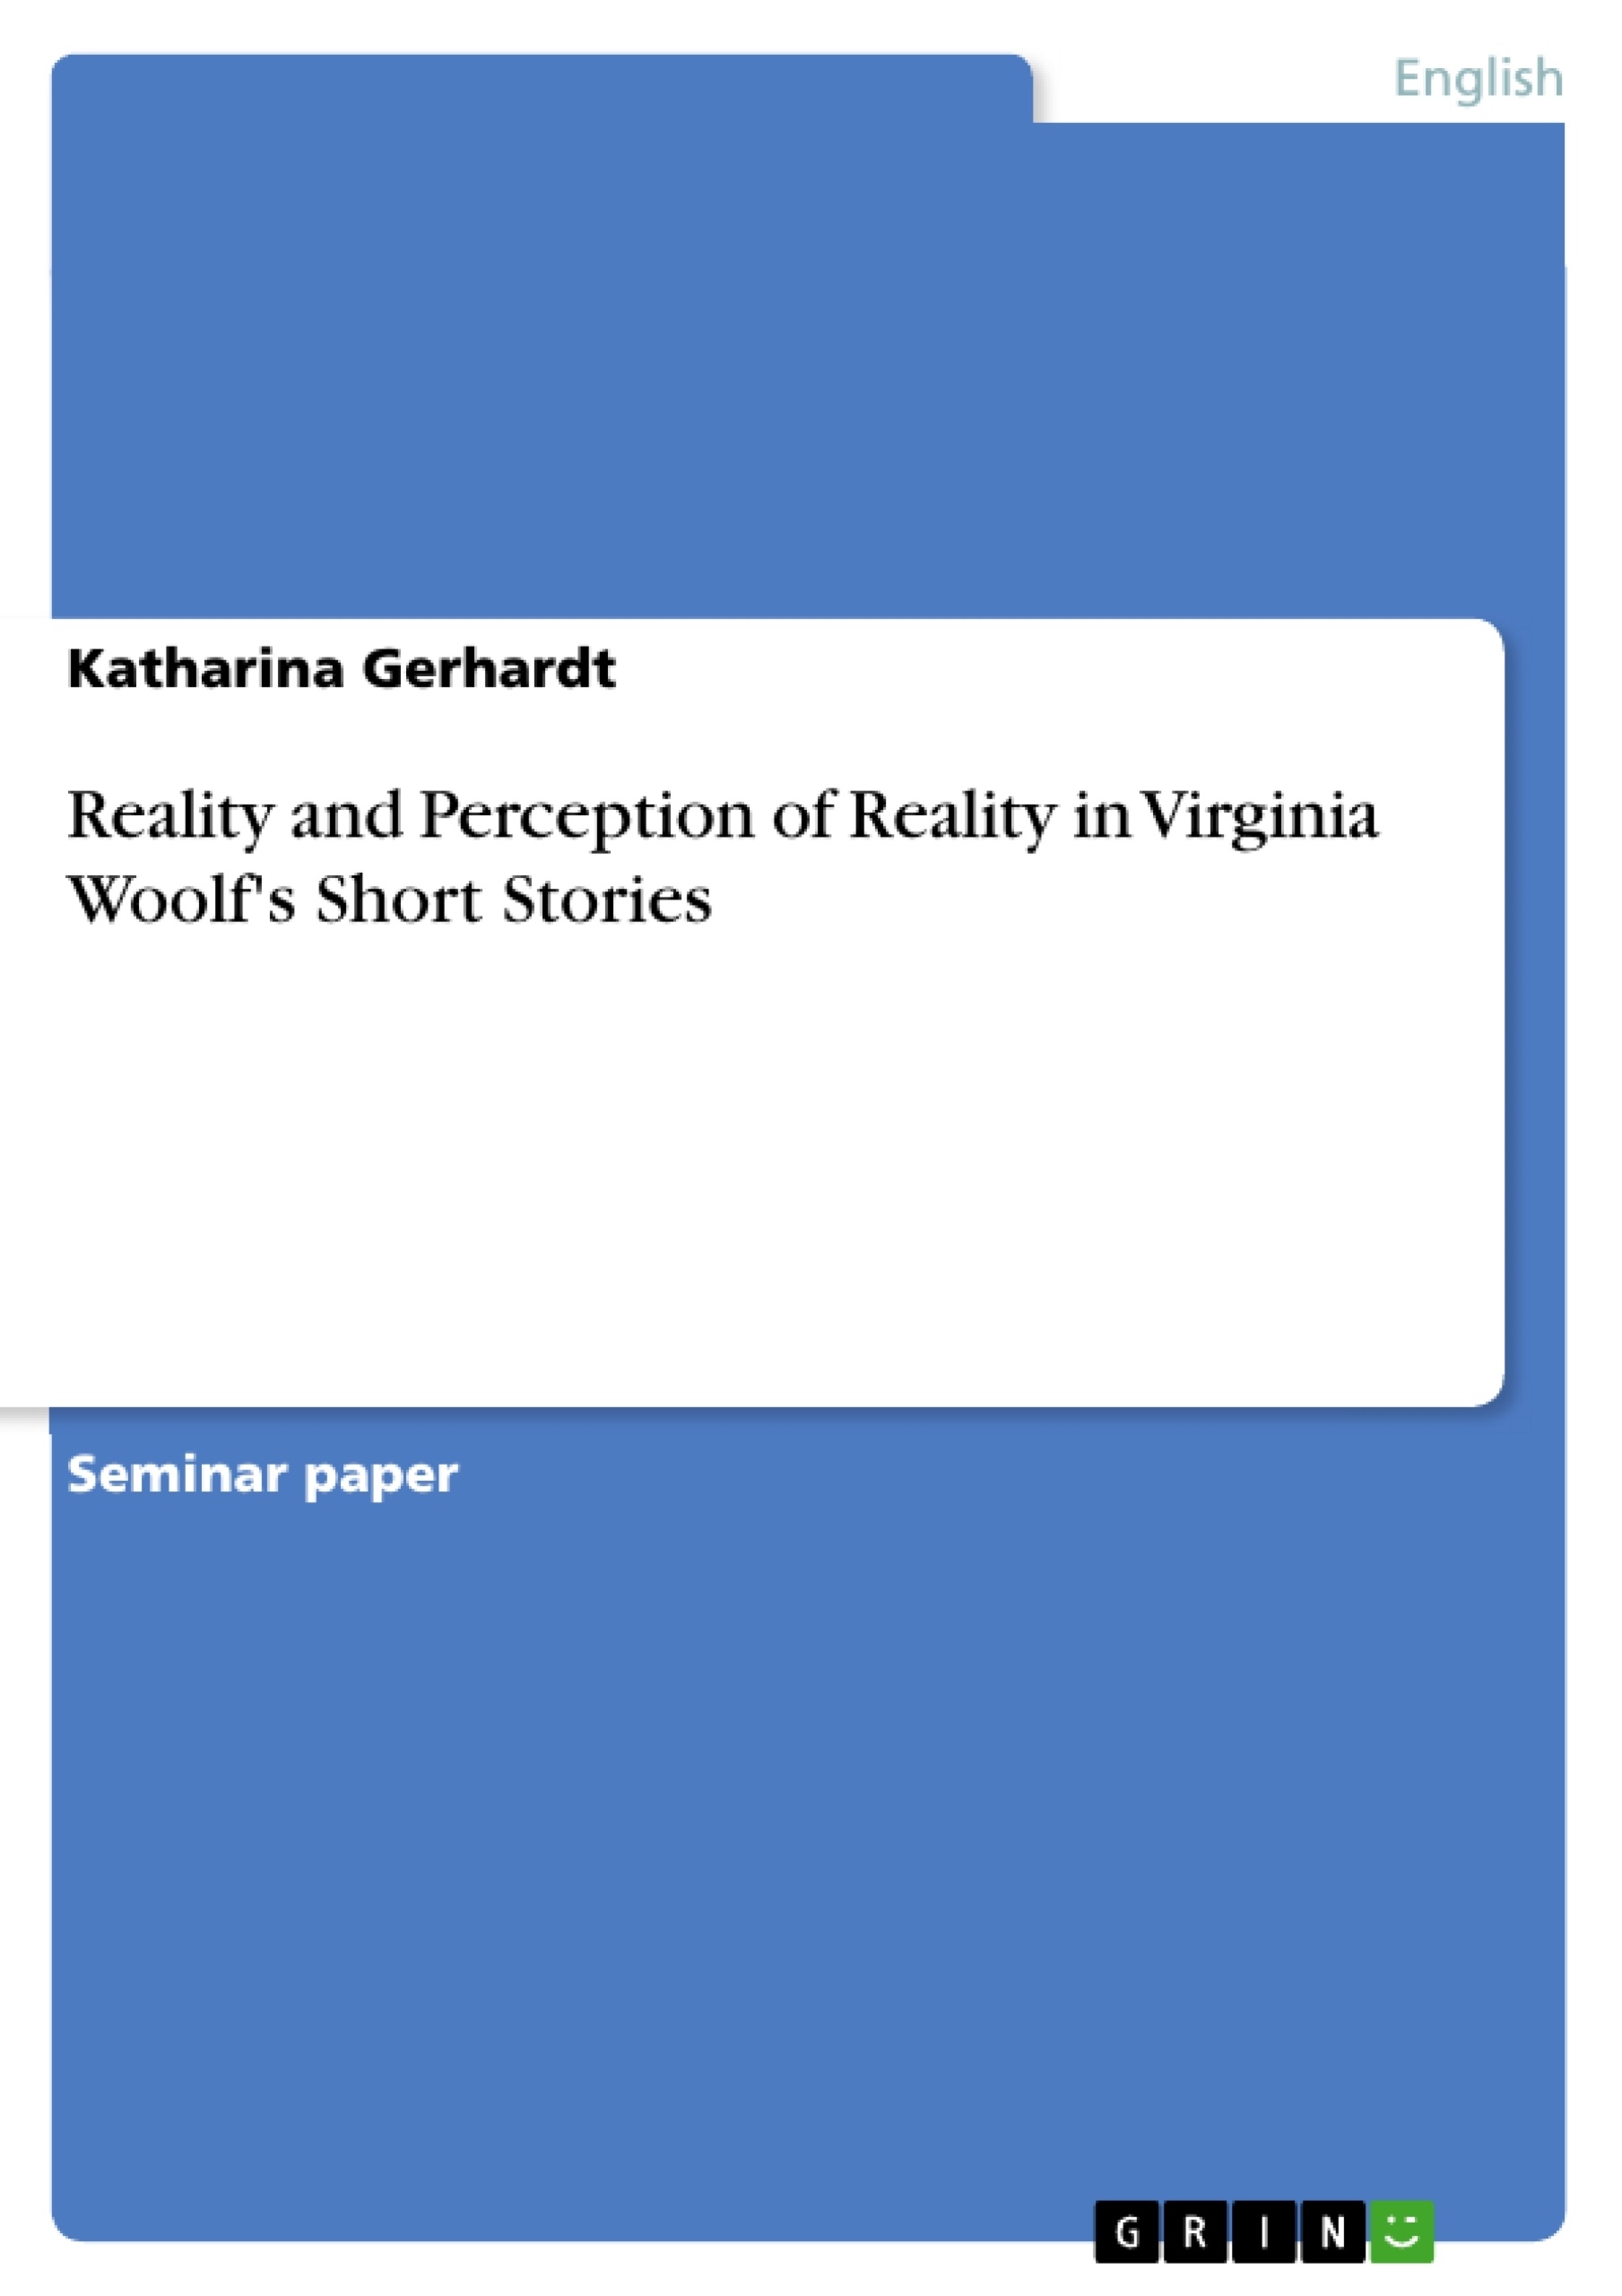 Título: Reality and Perception of Reality in Virginia Woolf's Short Stories